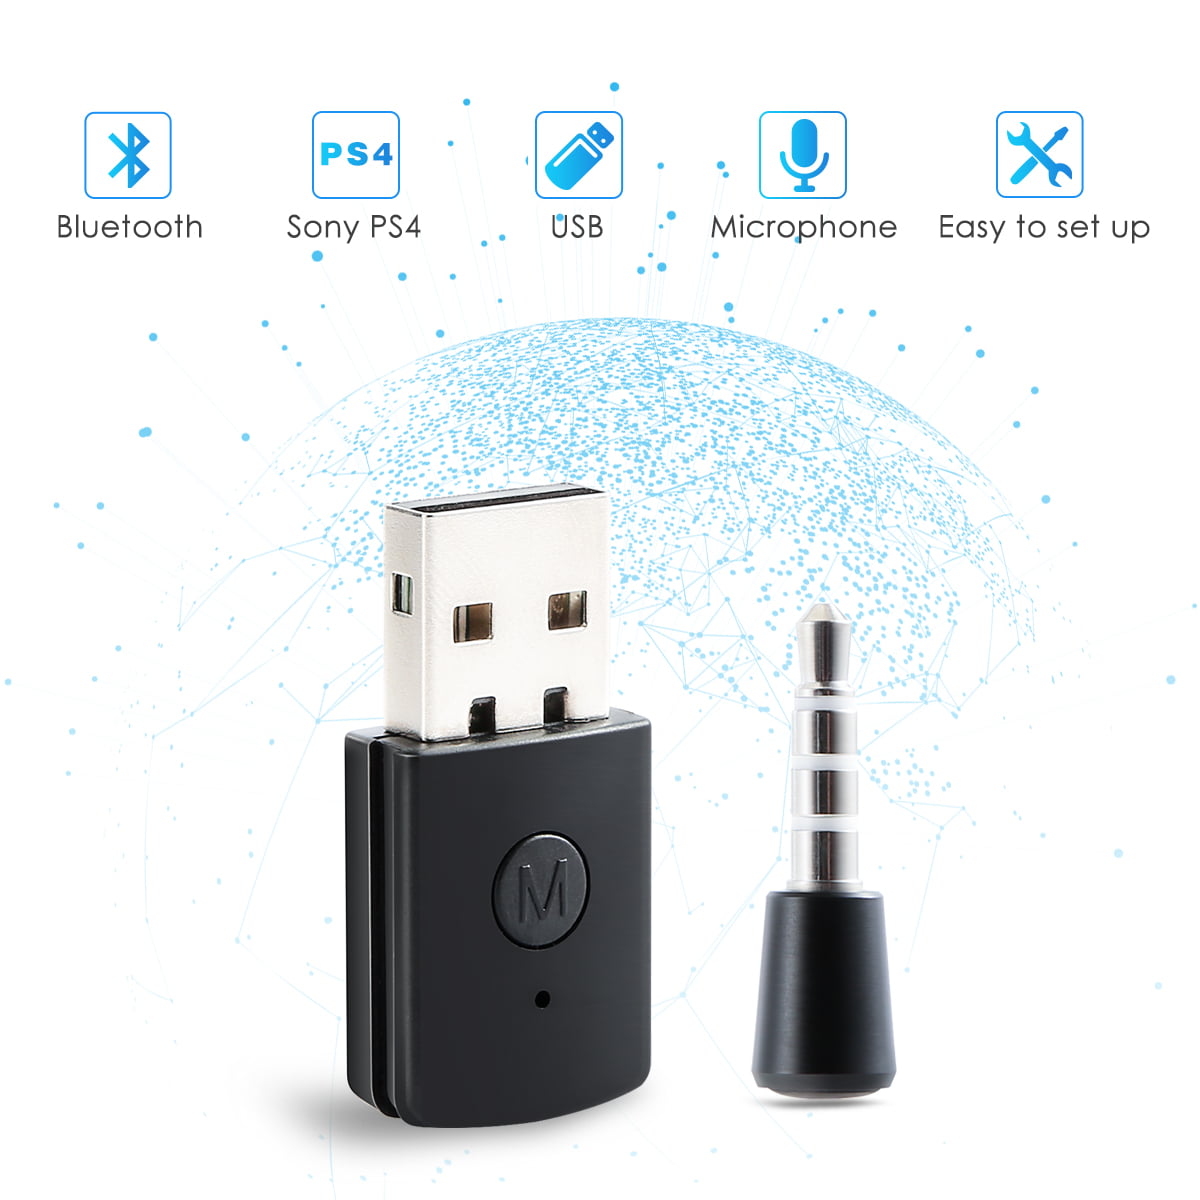 Mini Bluetooth Headset Dongle USB Adapter Receiver for PS.4 BlaY KT 